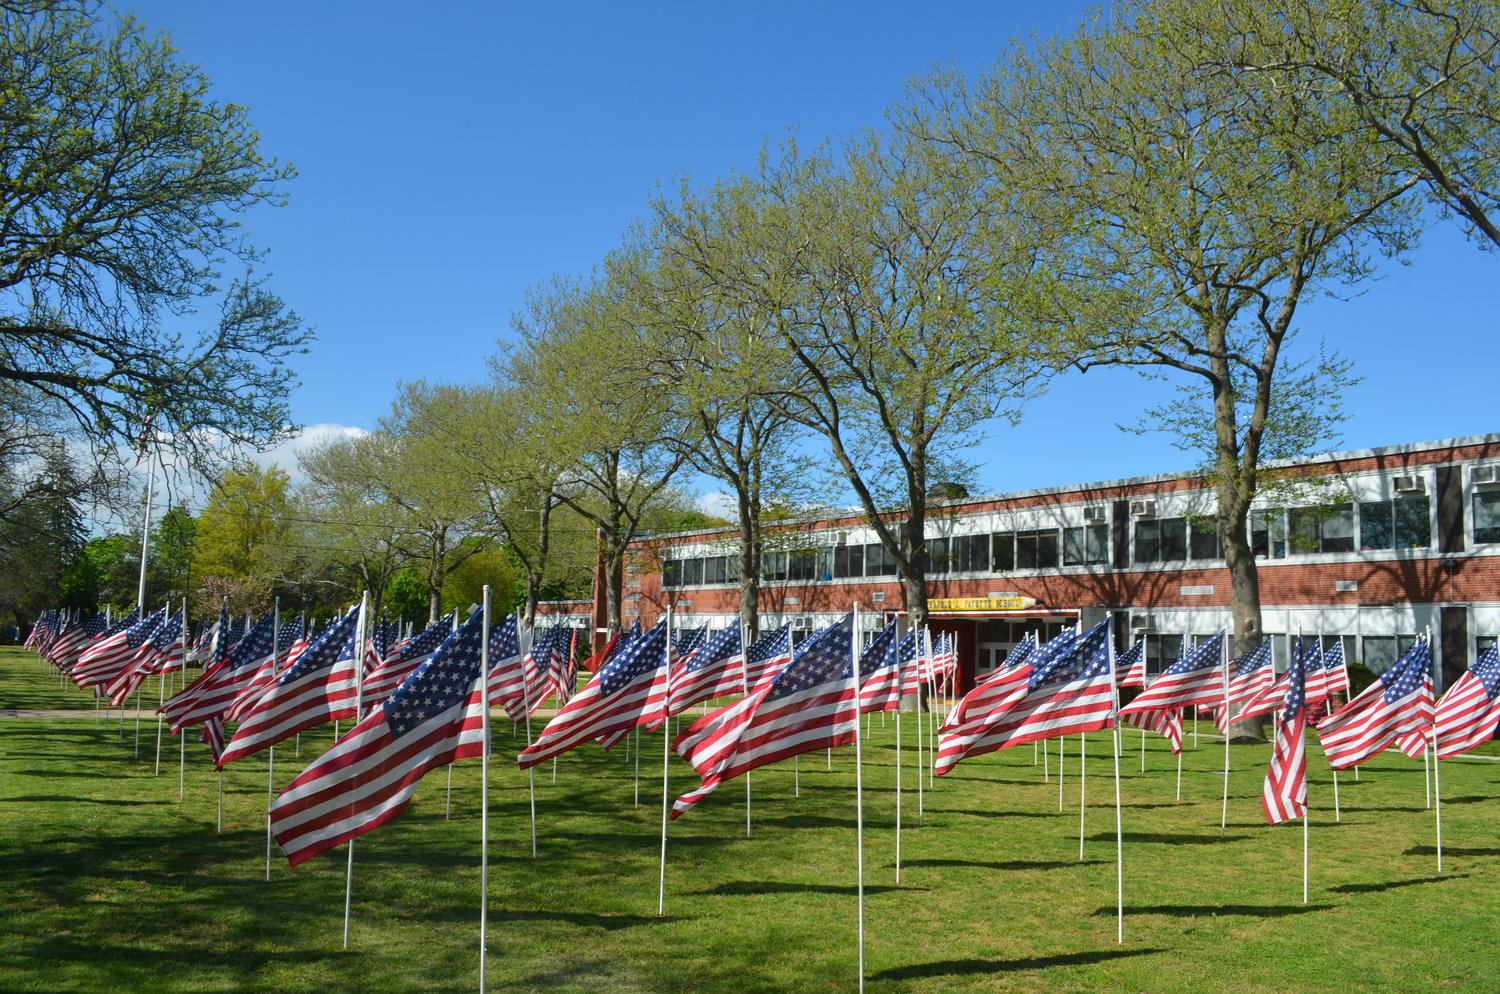 The school yard in front of Fayette is flooded with American flags, ahead of Memorial Day and Flag Day.